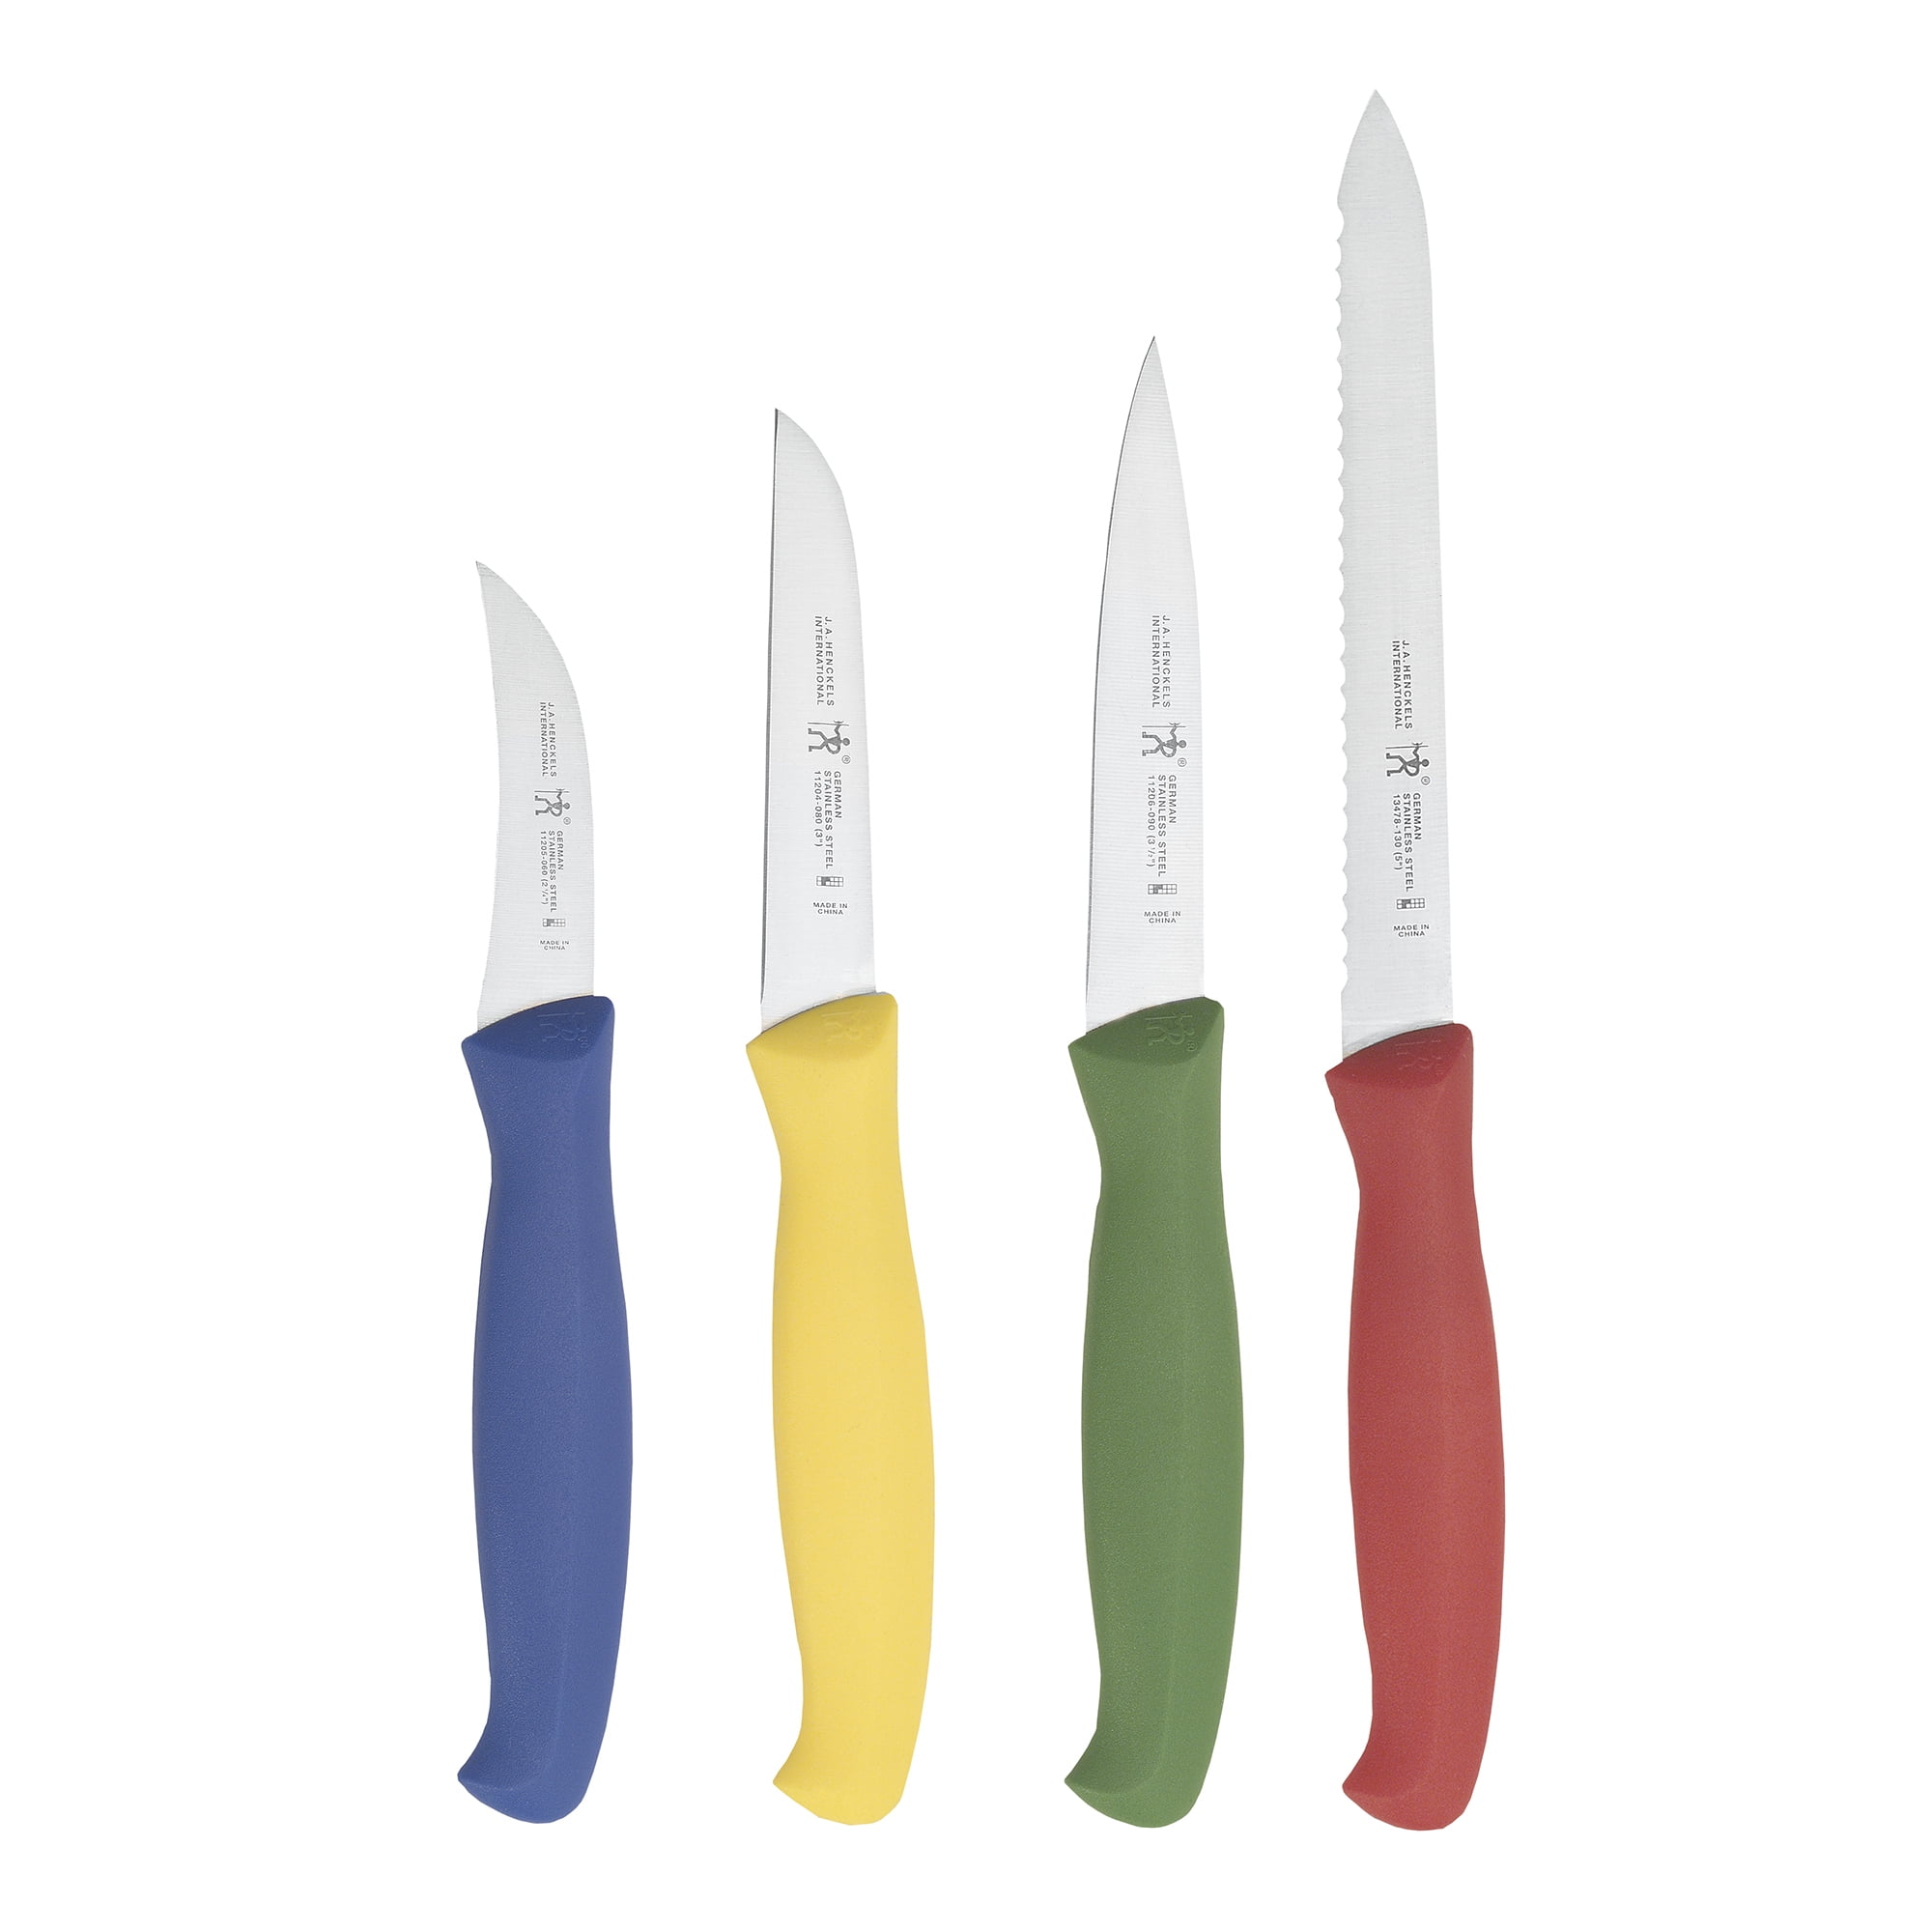 Picture of Zwilling Henckels 6669634 Stainless Steel Knife Set - 4 Piece